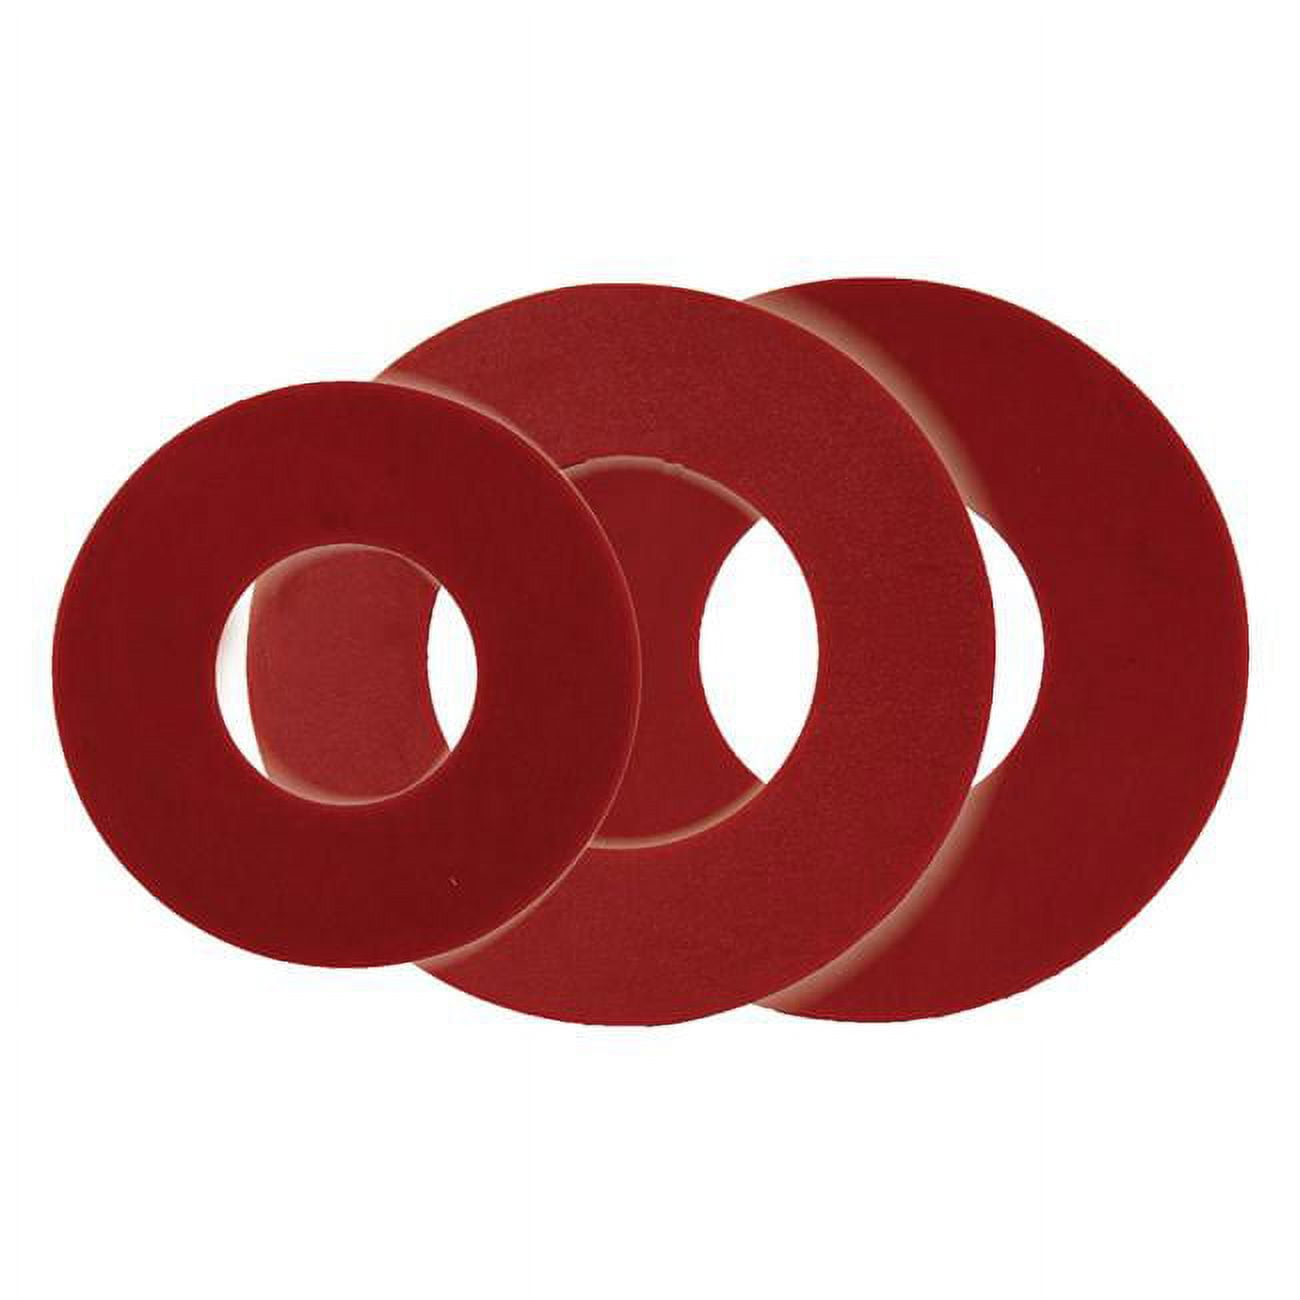 4000161 Dual Flush Seal Kit - Red, Rubber - Pack Of 3